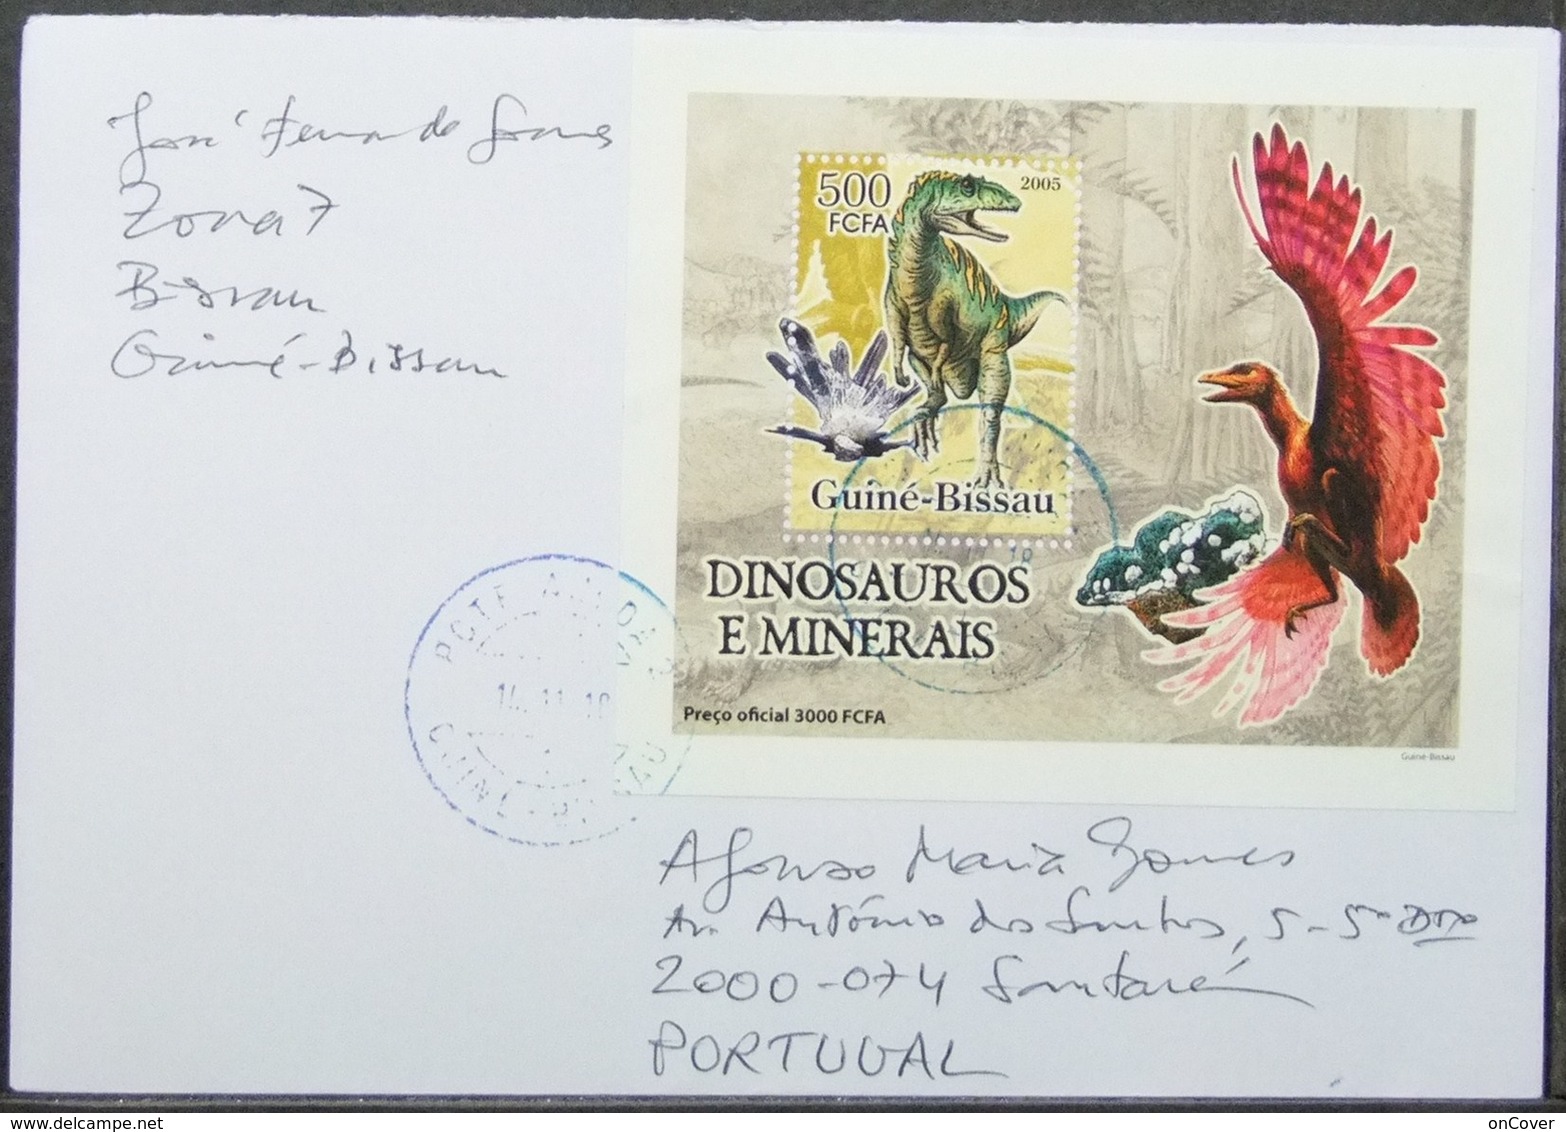 Guine-Bissau - Cover To Portugal Minerals Dinosaur Proof Perforate & Imperforate - Prehistorics